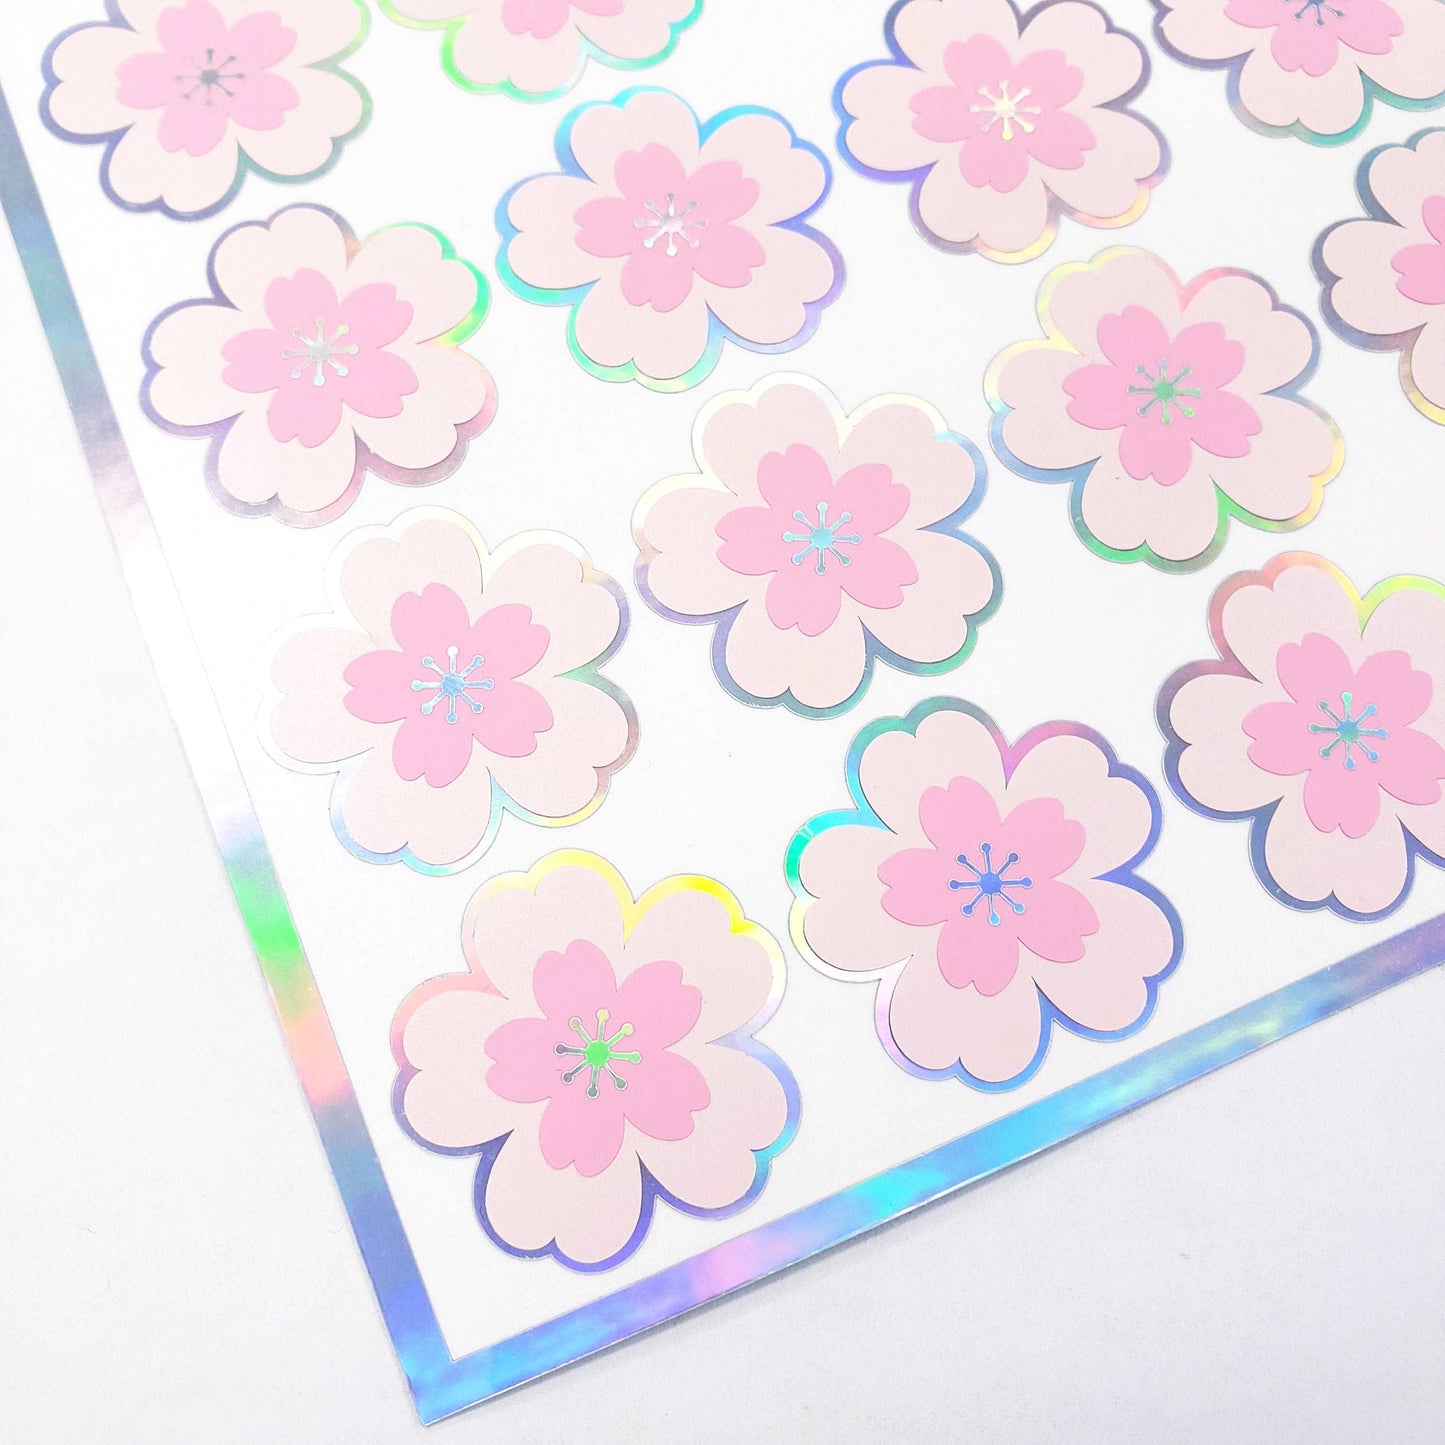 20 Holographic Cherry Blossom Stickers, Pink Sakura Flower Decals, Spring Crafts, Wedding Envelope Seals, Mother's Day Gift, peel and stick